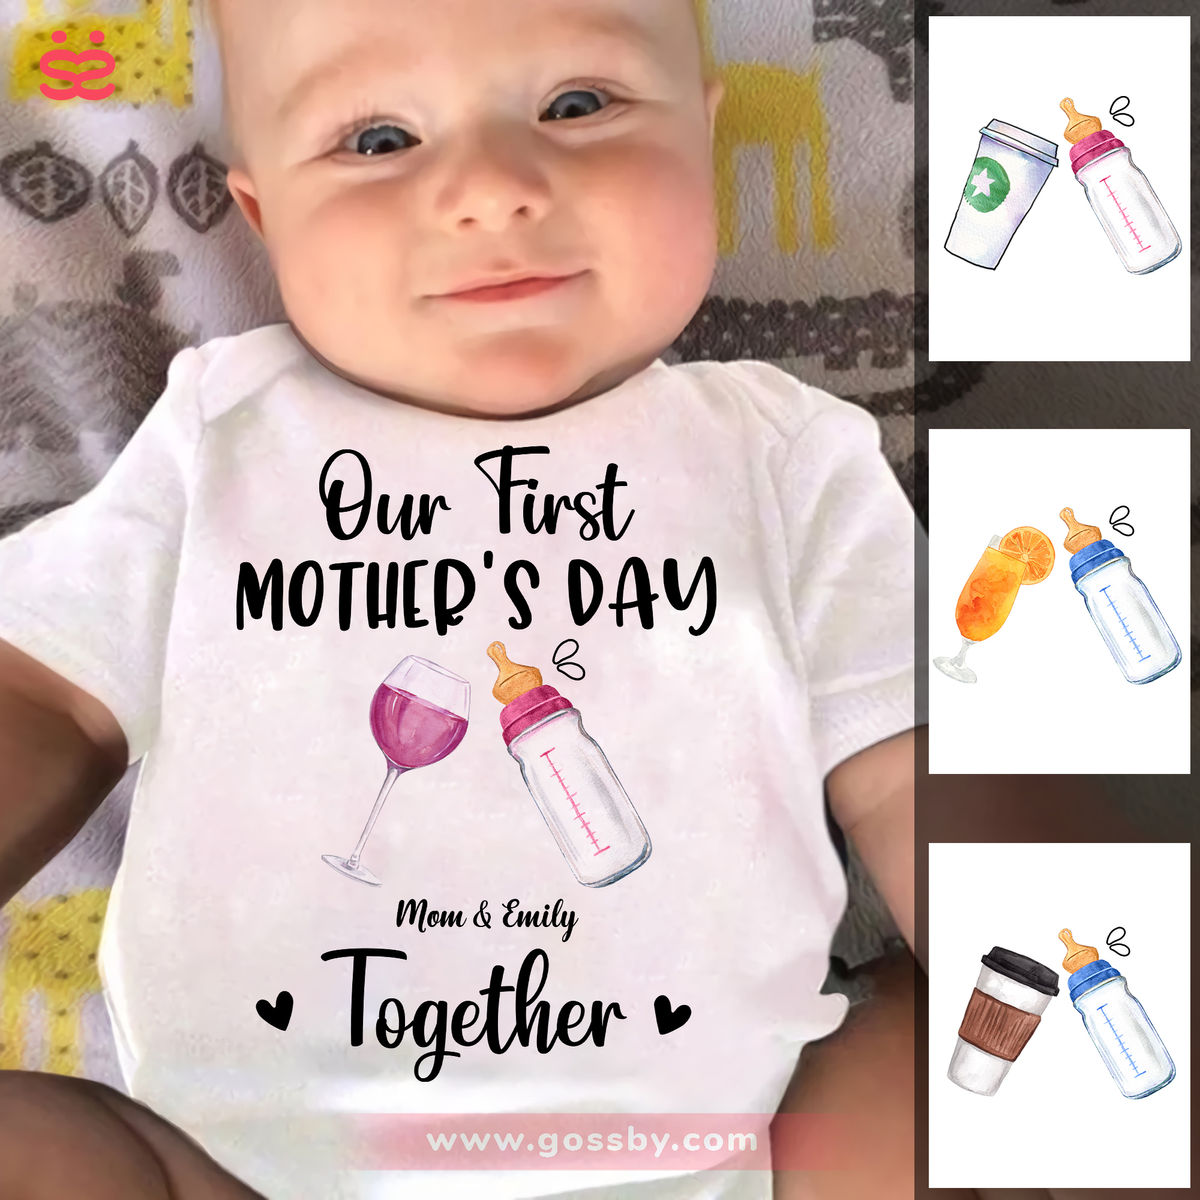 Our First Mother's Day Together - Baby Shower Gift